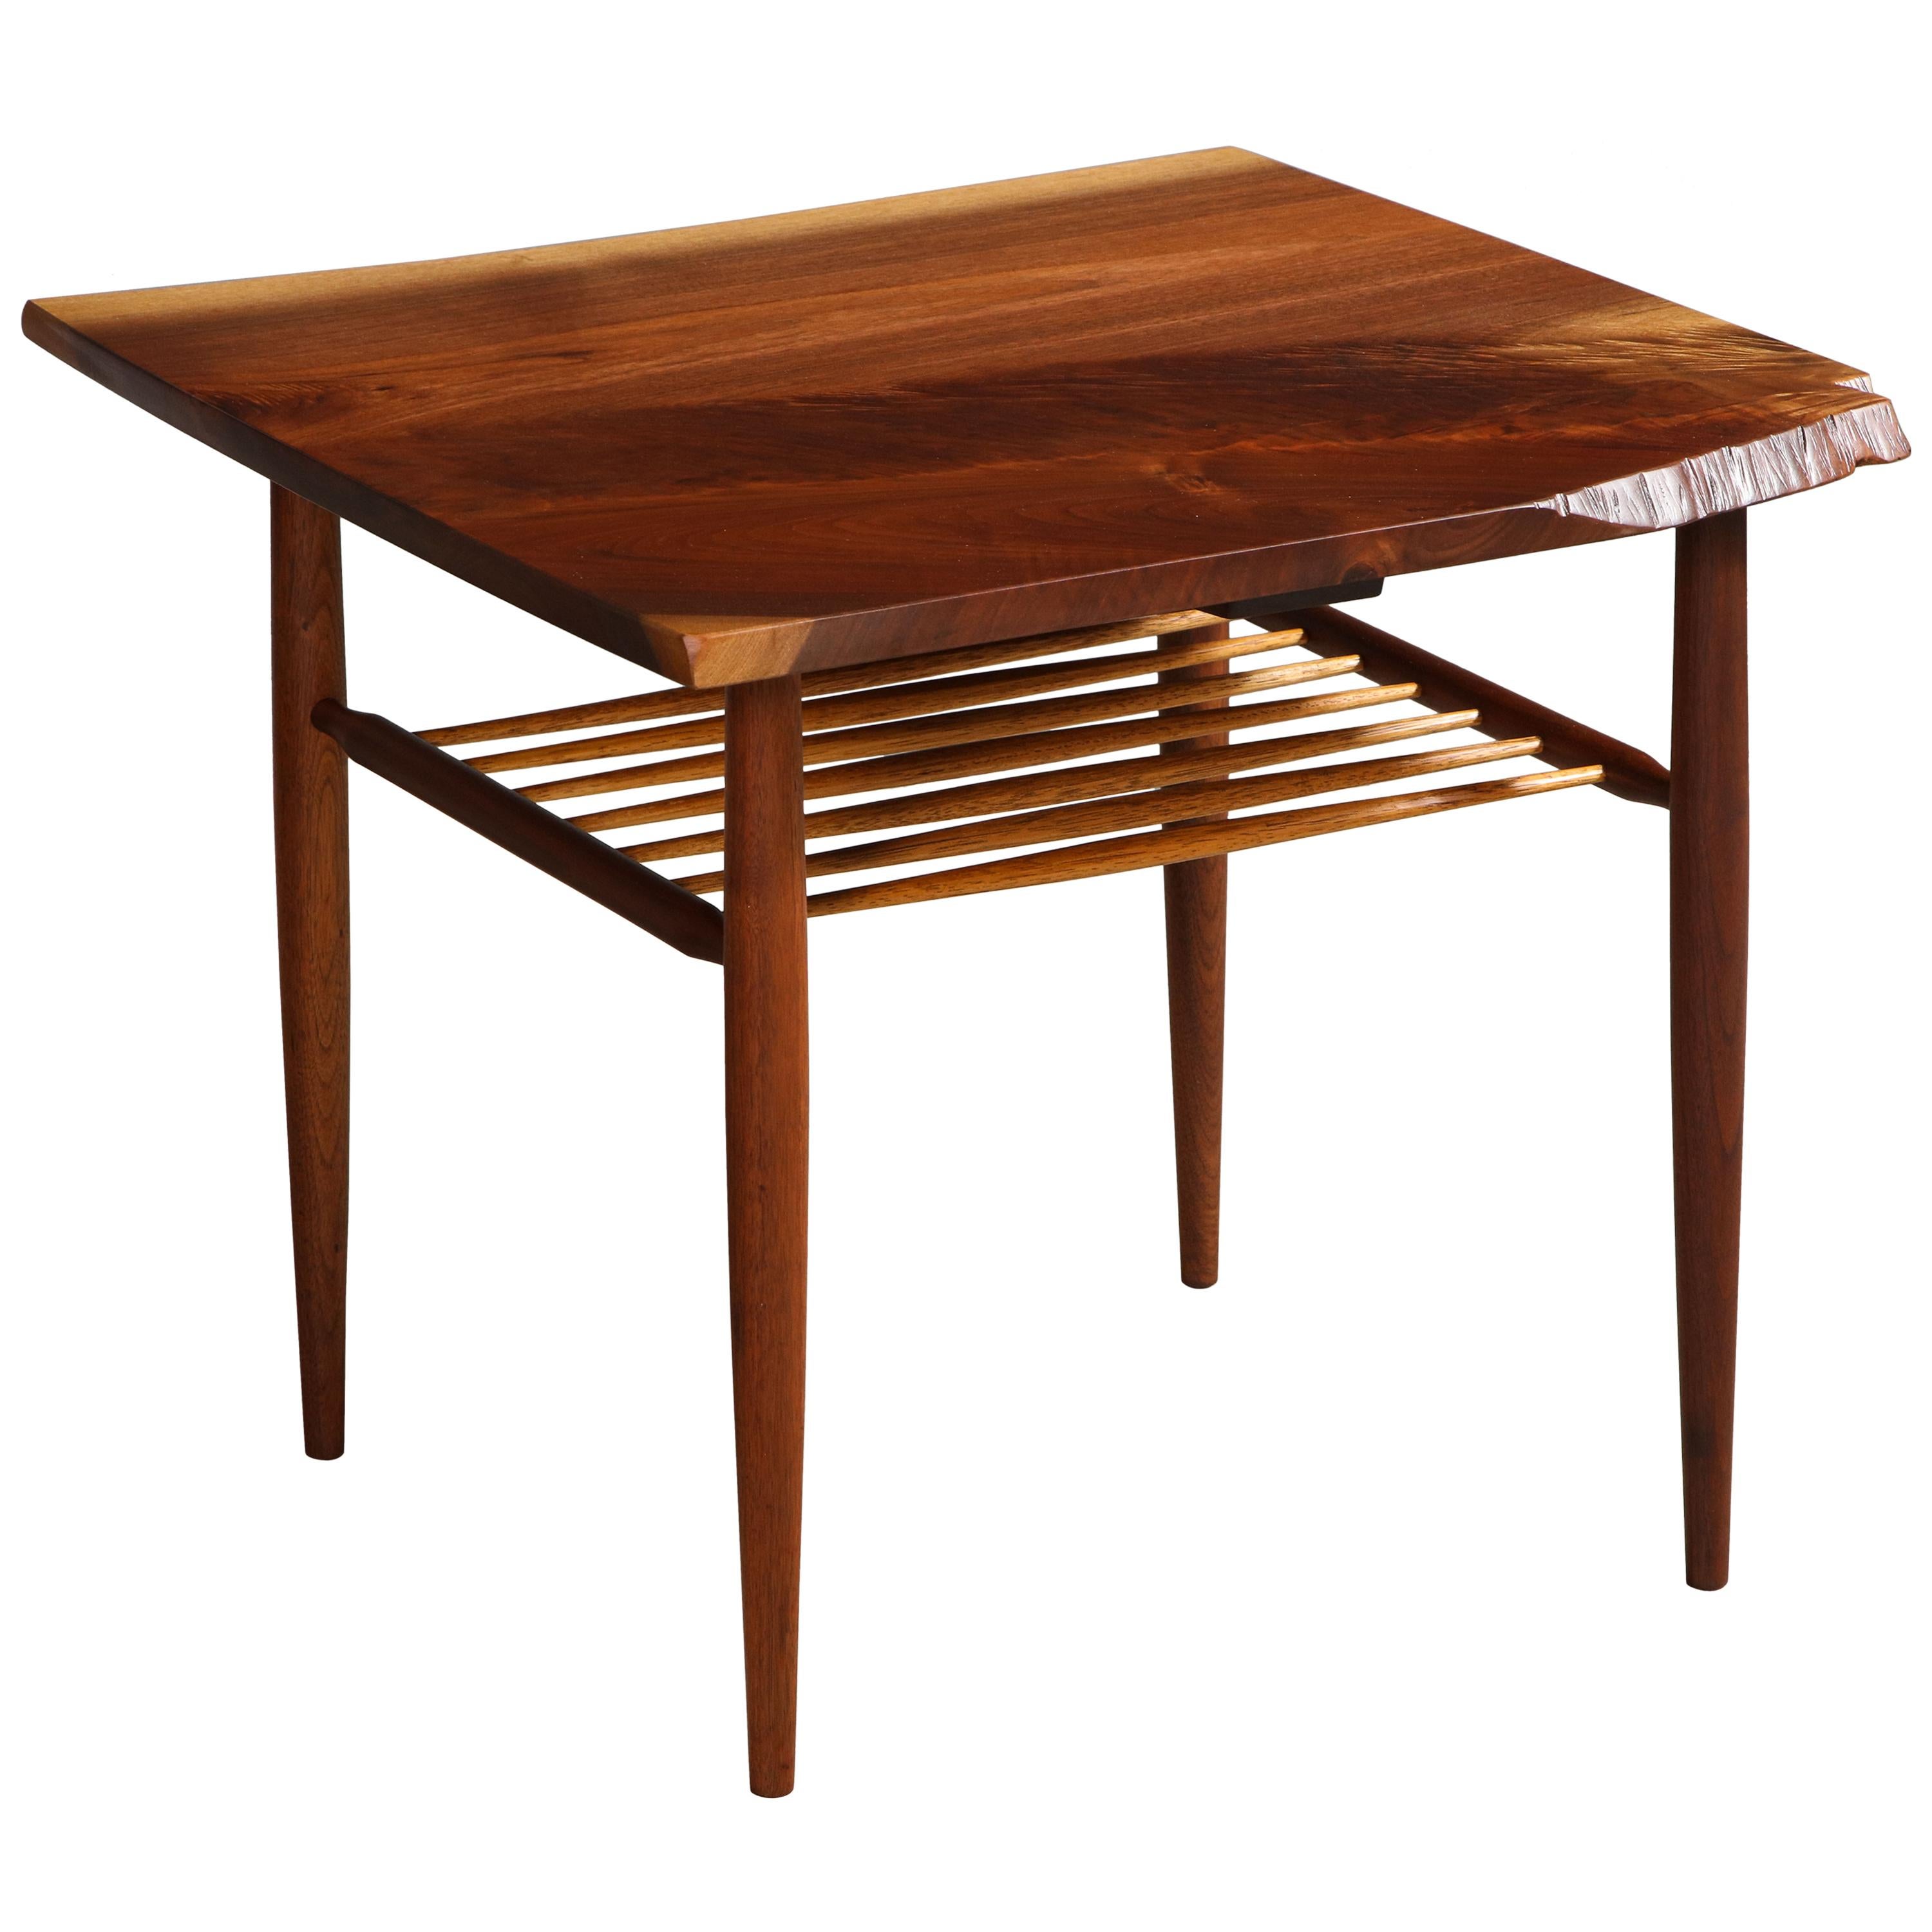 Walnut End Table with a Spindle Shelf, by George Nakashima